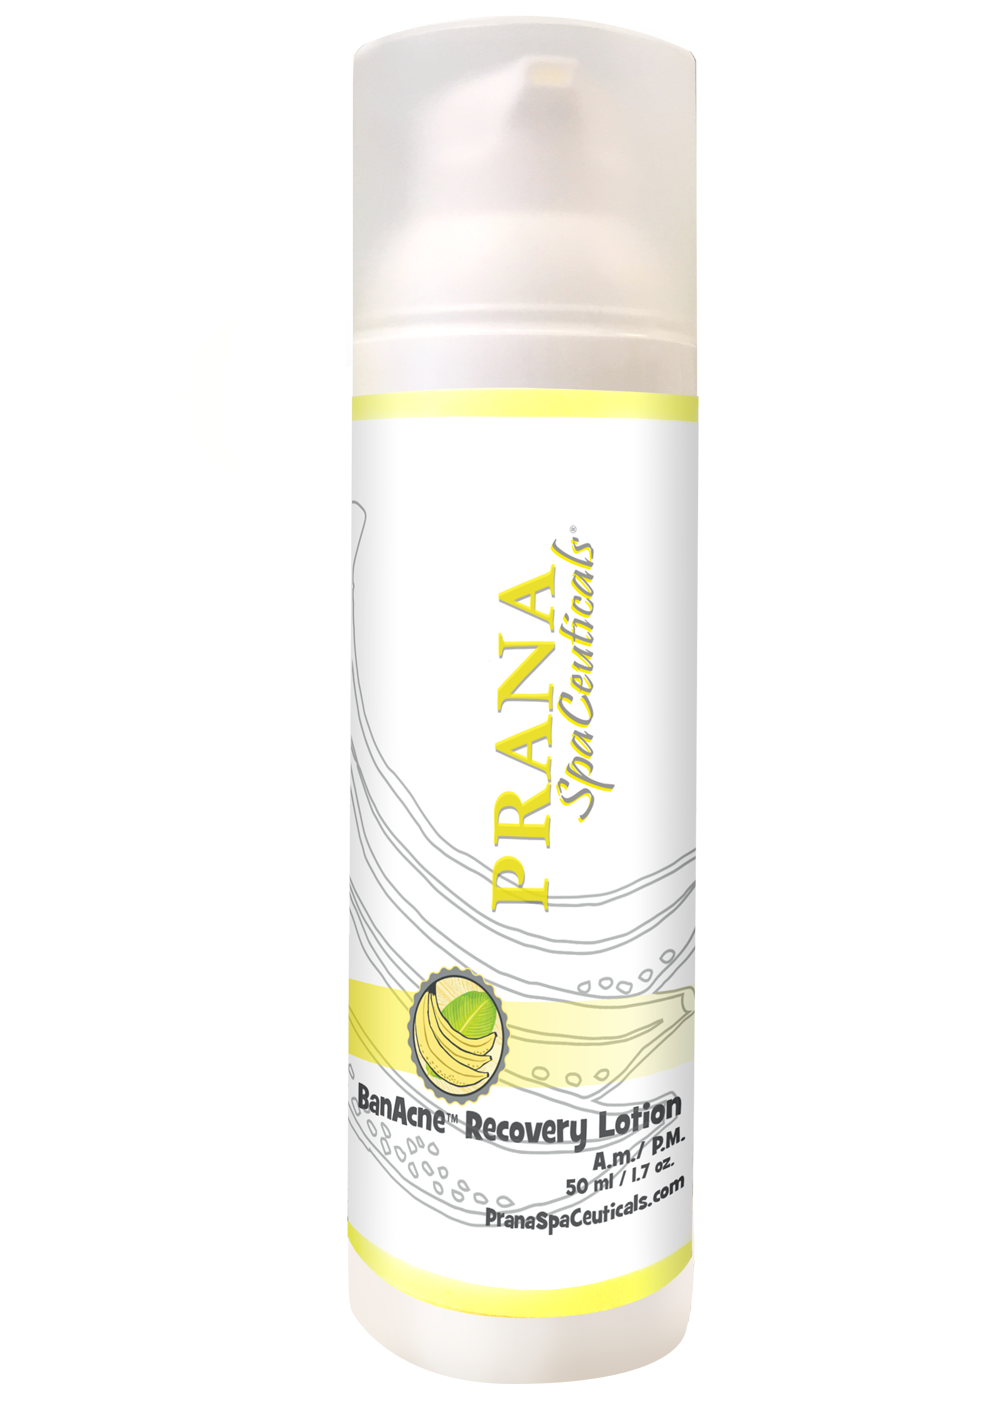 Prana SpaCeuticals Teenage Acne BanAcne Recovery Lotion 2.54oz - European Beauty by B